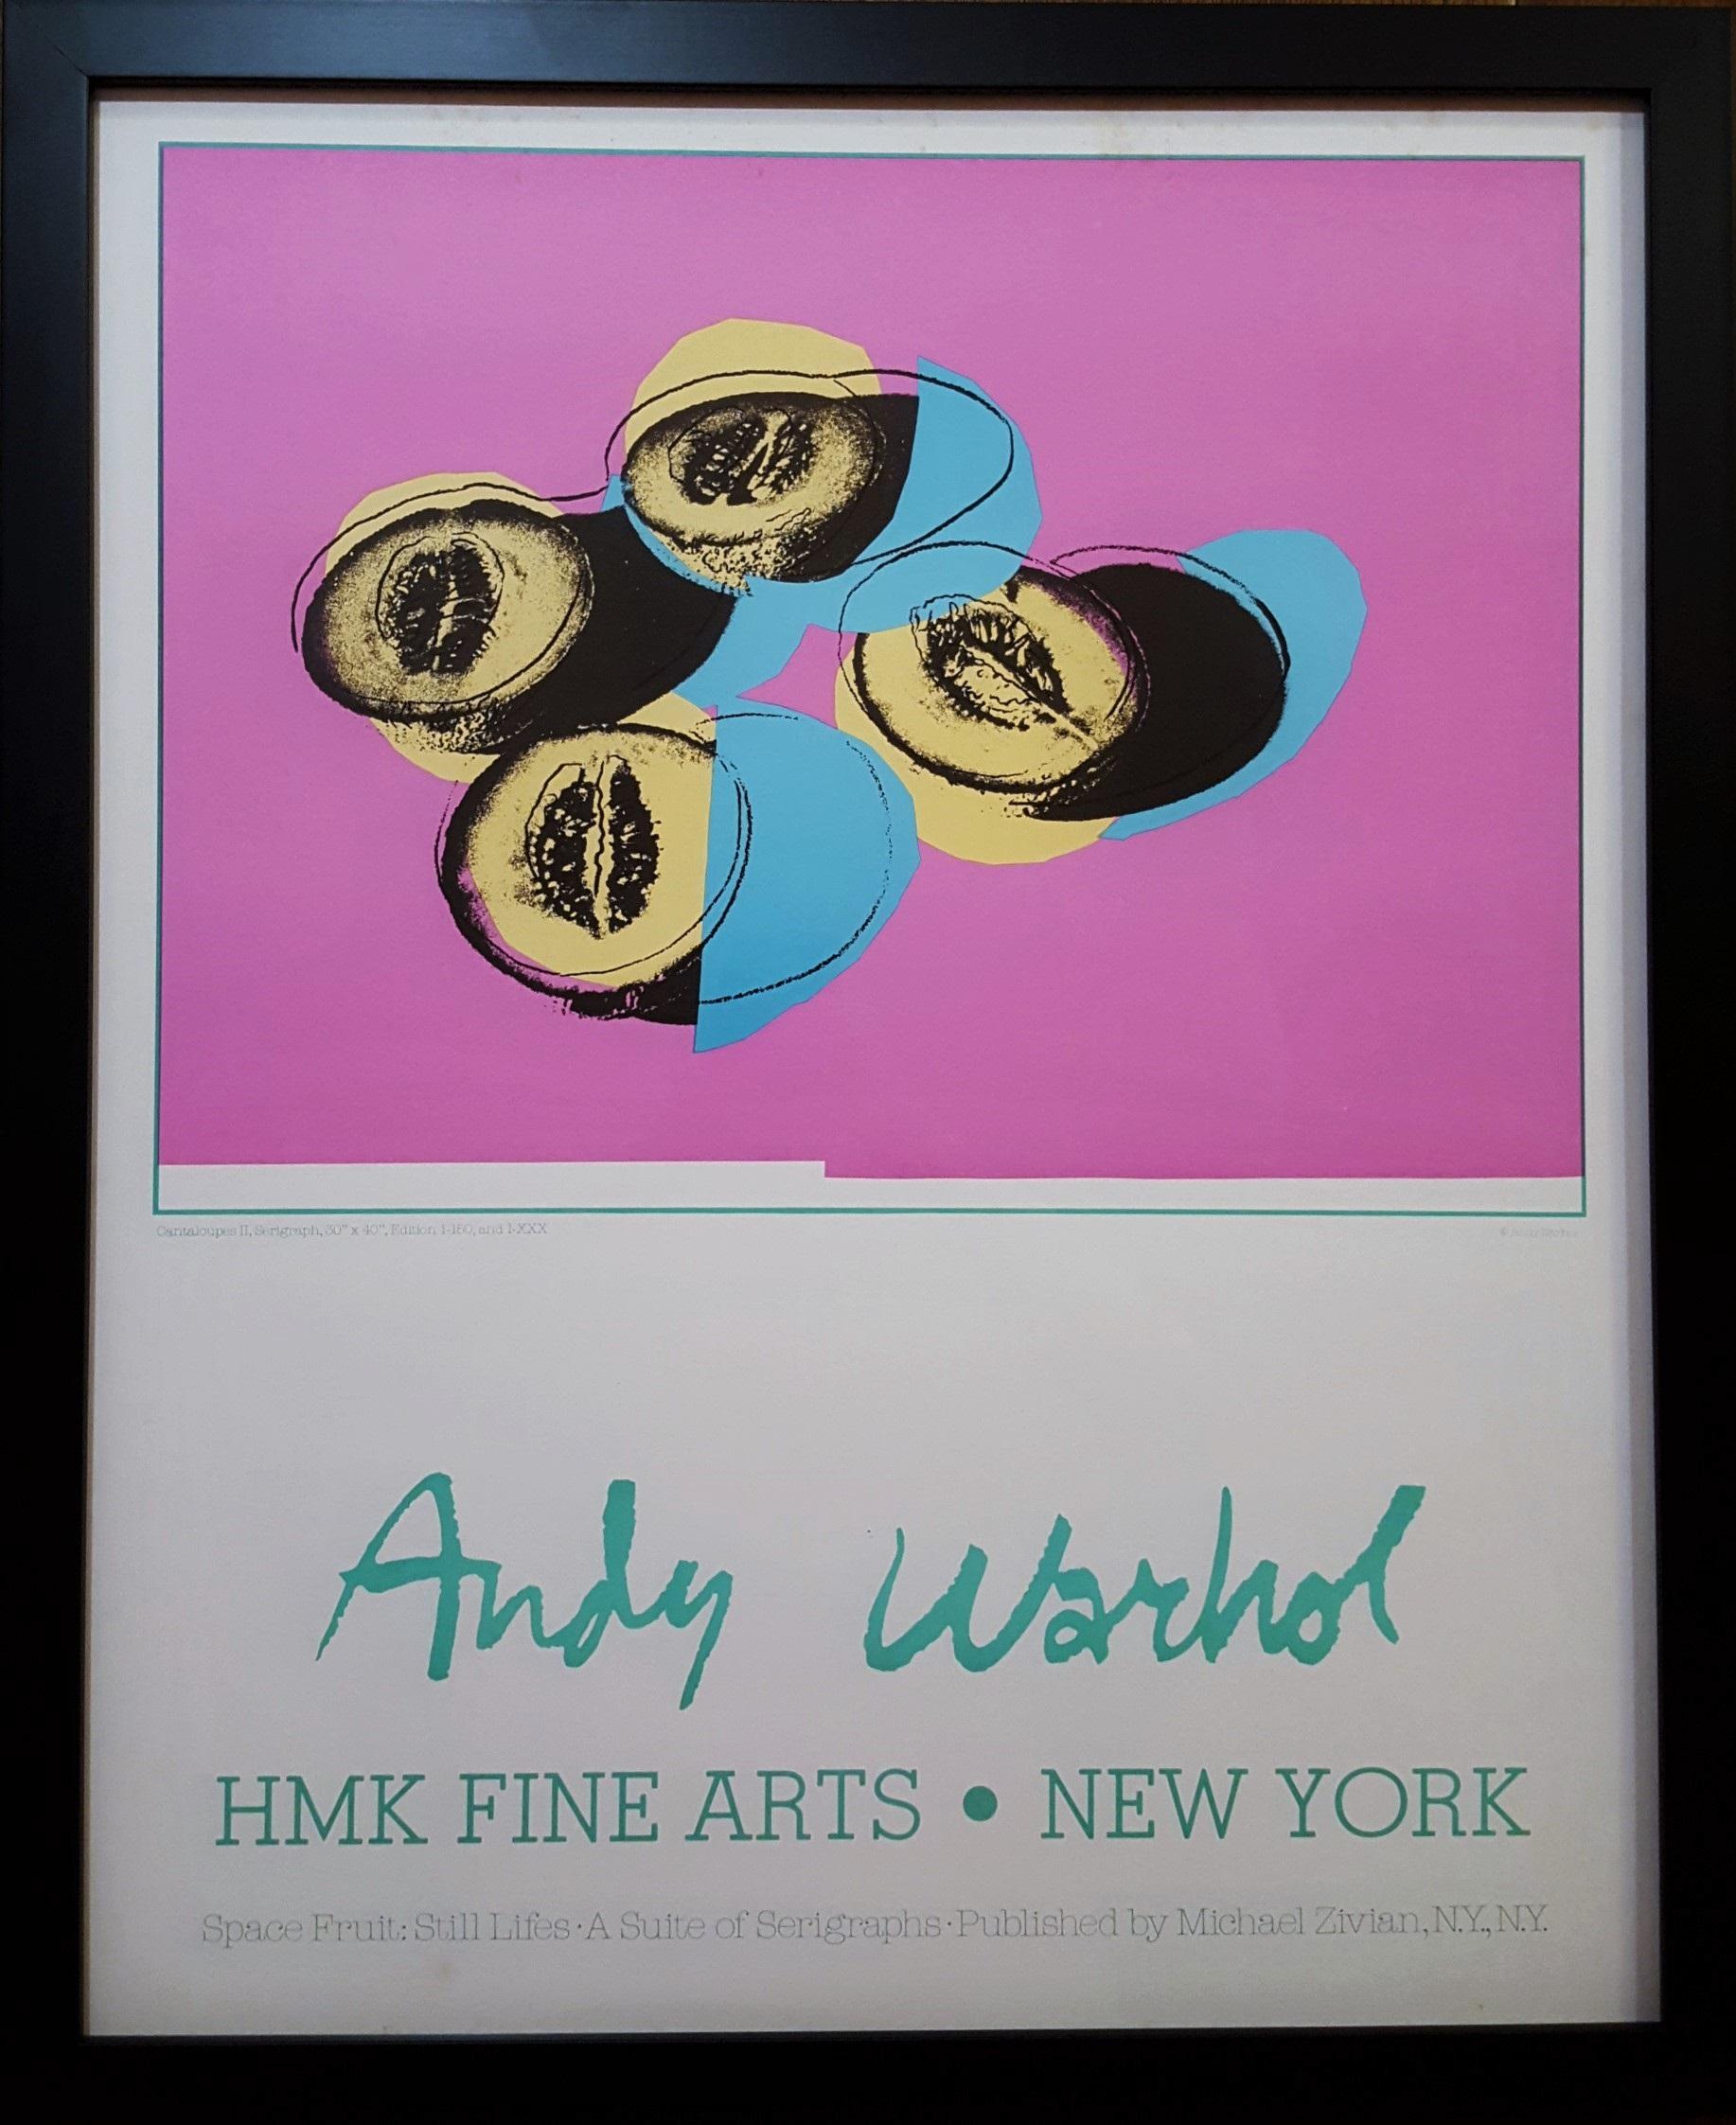 Cantaloupes II - Print by (after) Andy Warhol